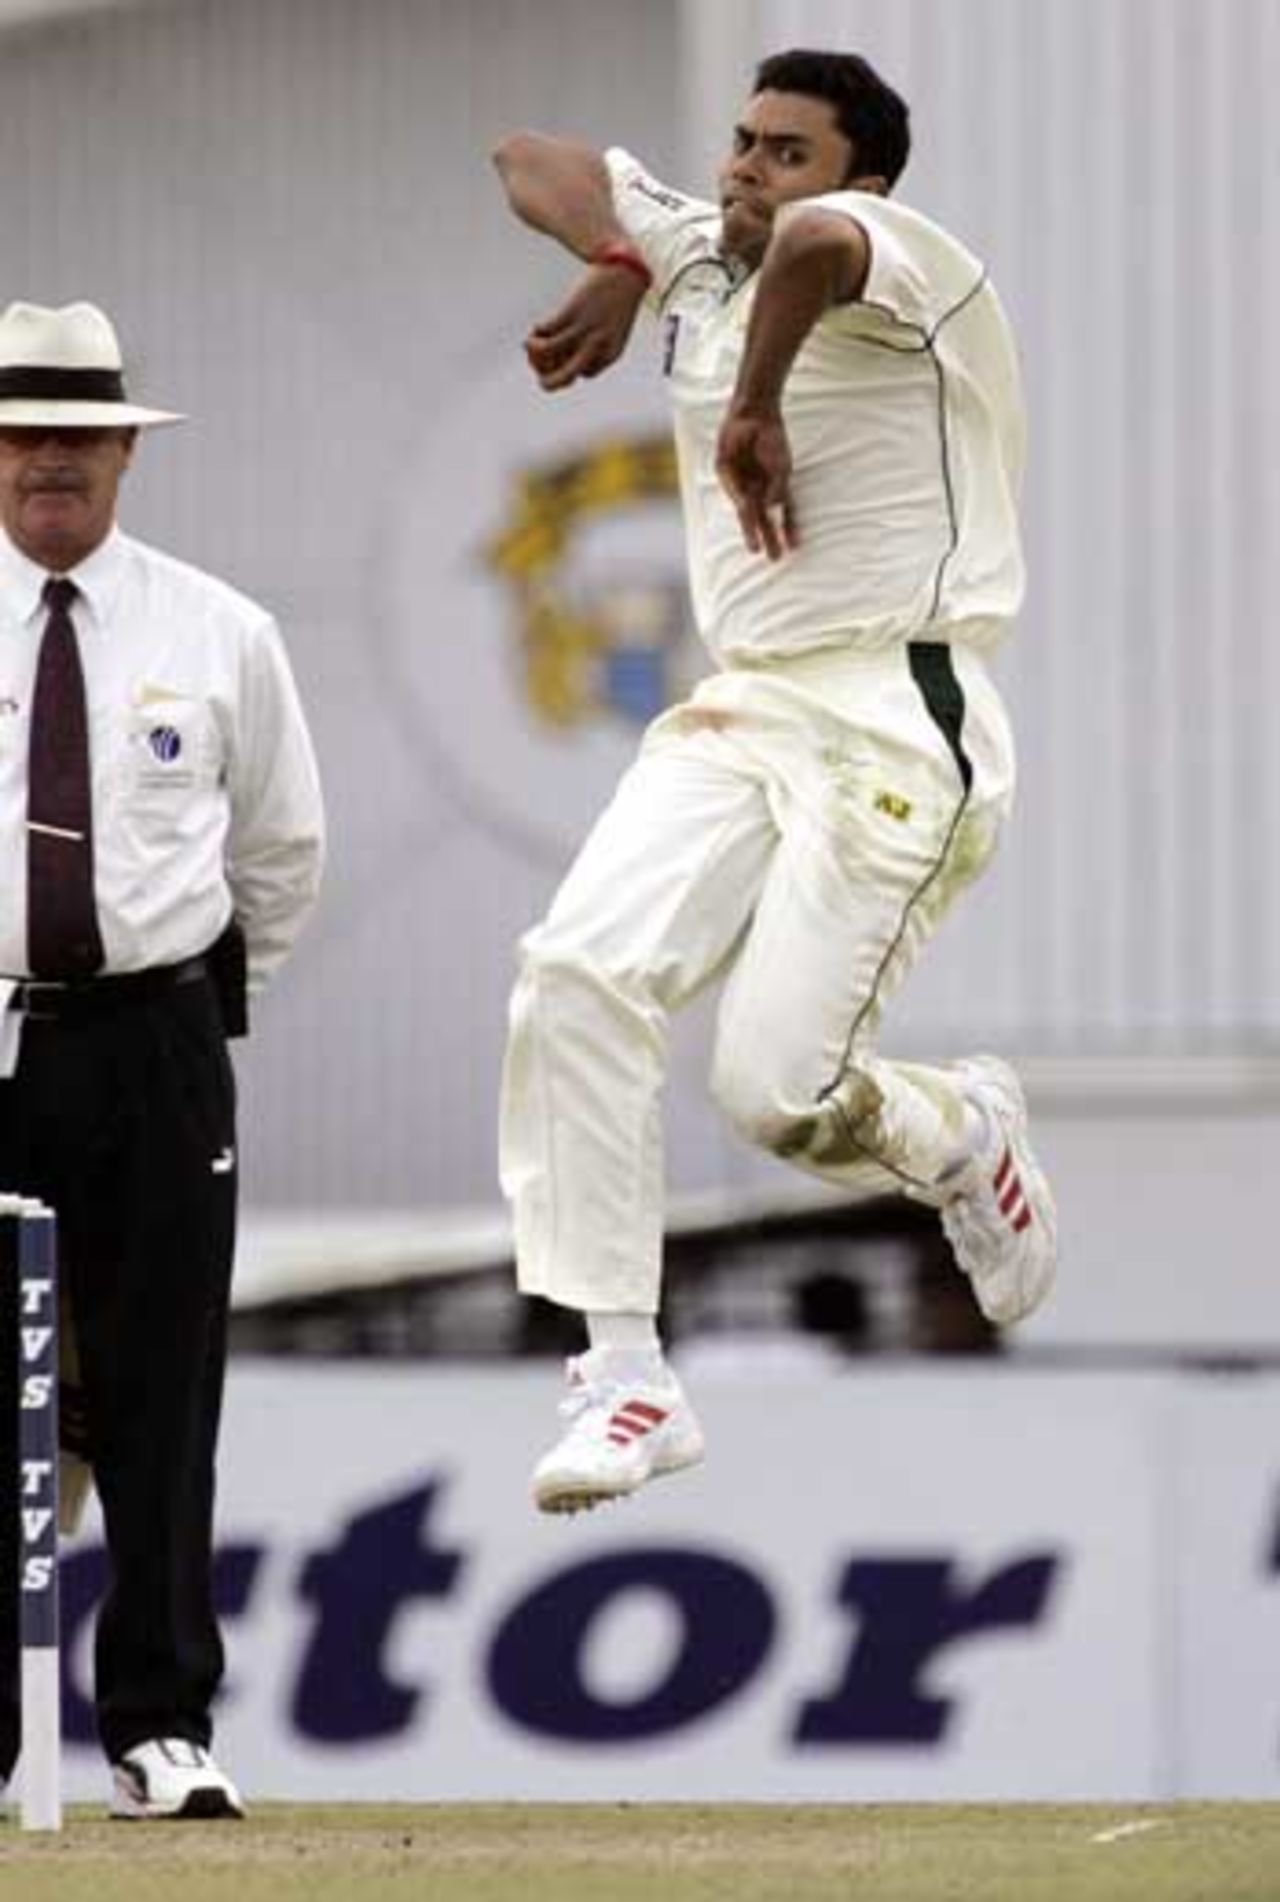 Danish Kaneria was easily the best bowler on show, mixing up his deliveries delectably, India v Pakistan, 1st Test, Mohali, March 9, 2005